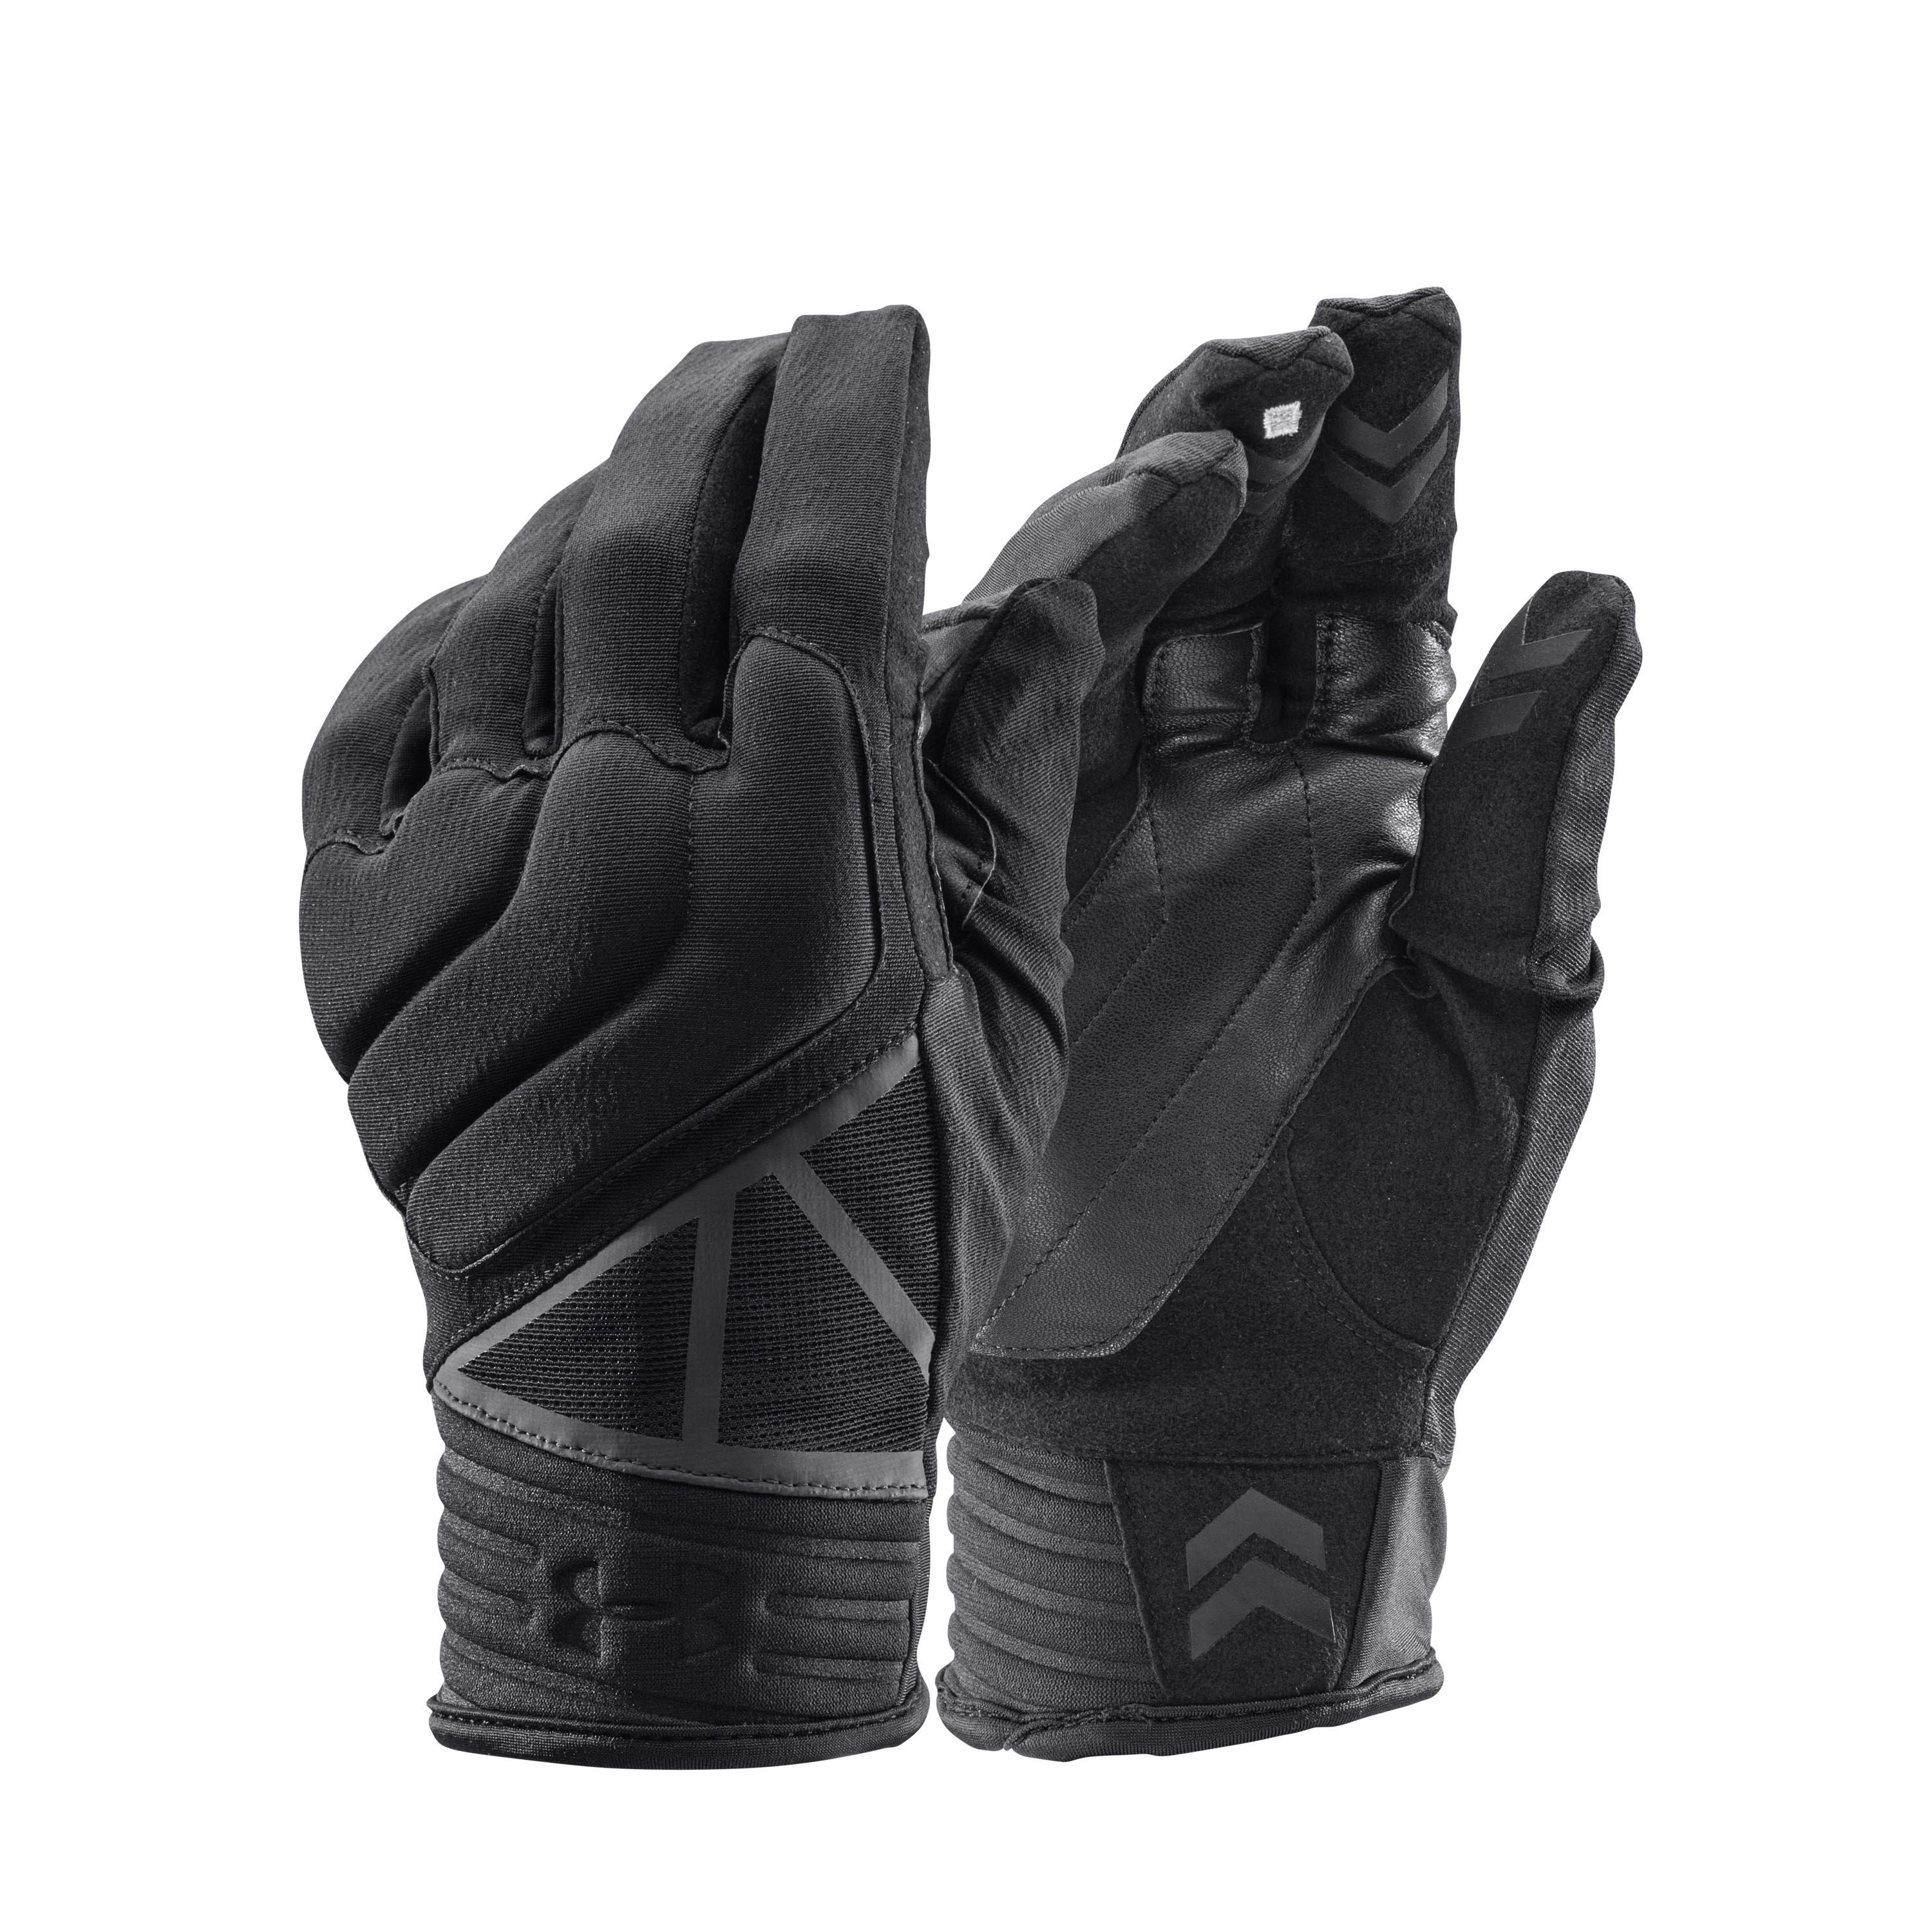 Under Tactical Duty Gloves